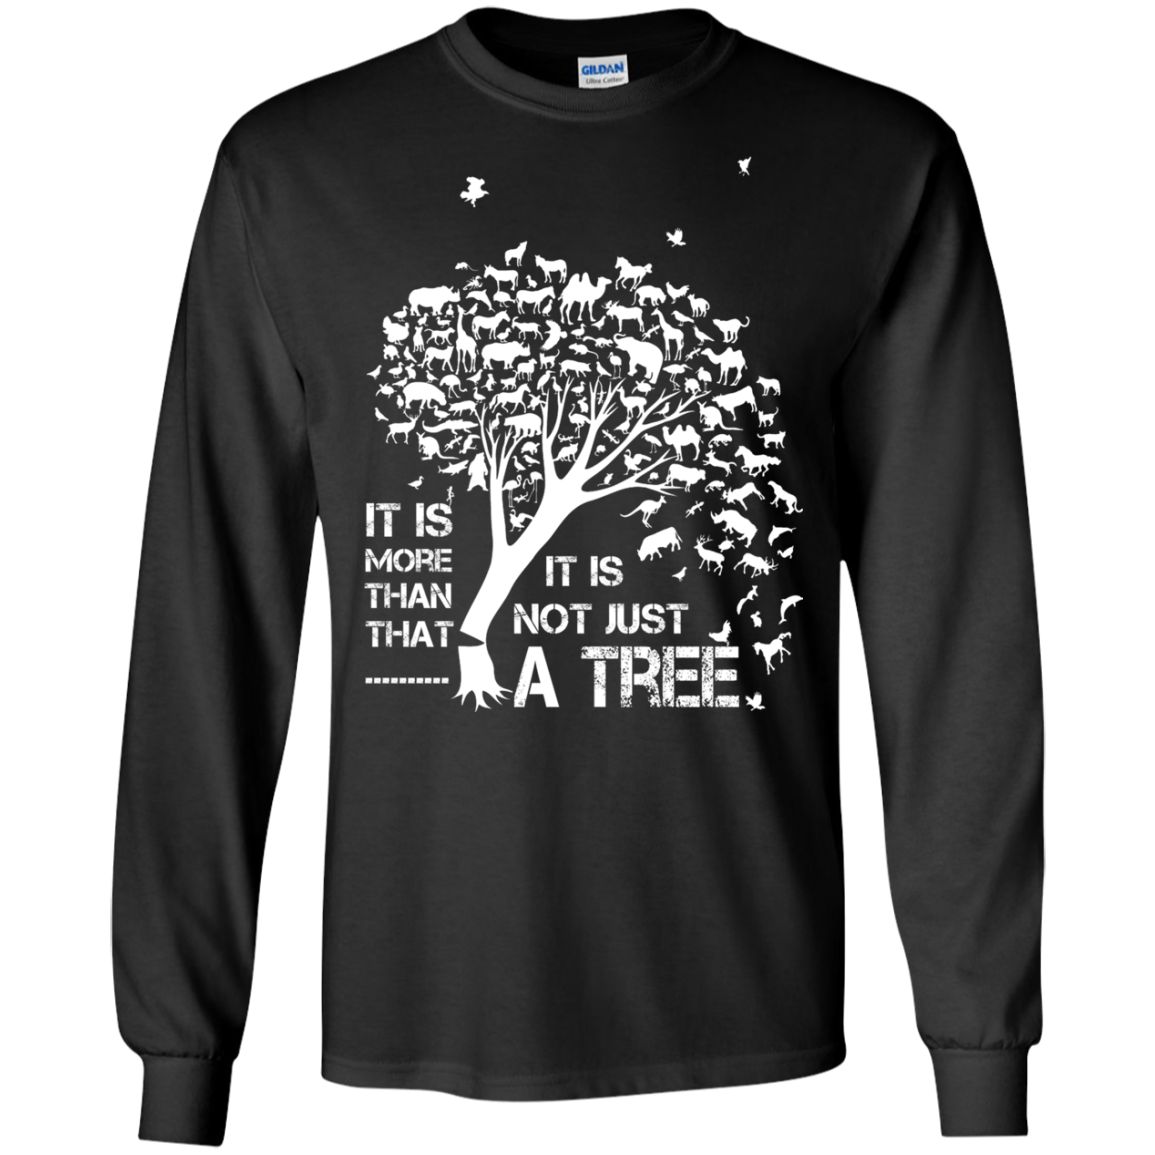 It is not just a tree - It is more than that shirt, hoodie